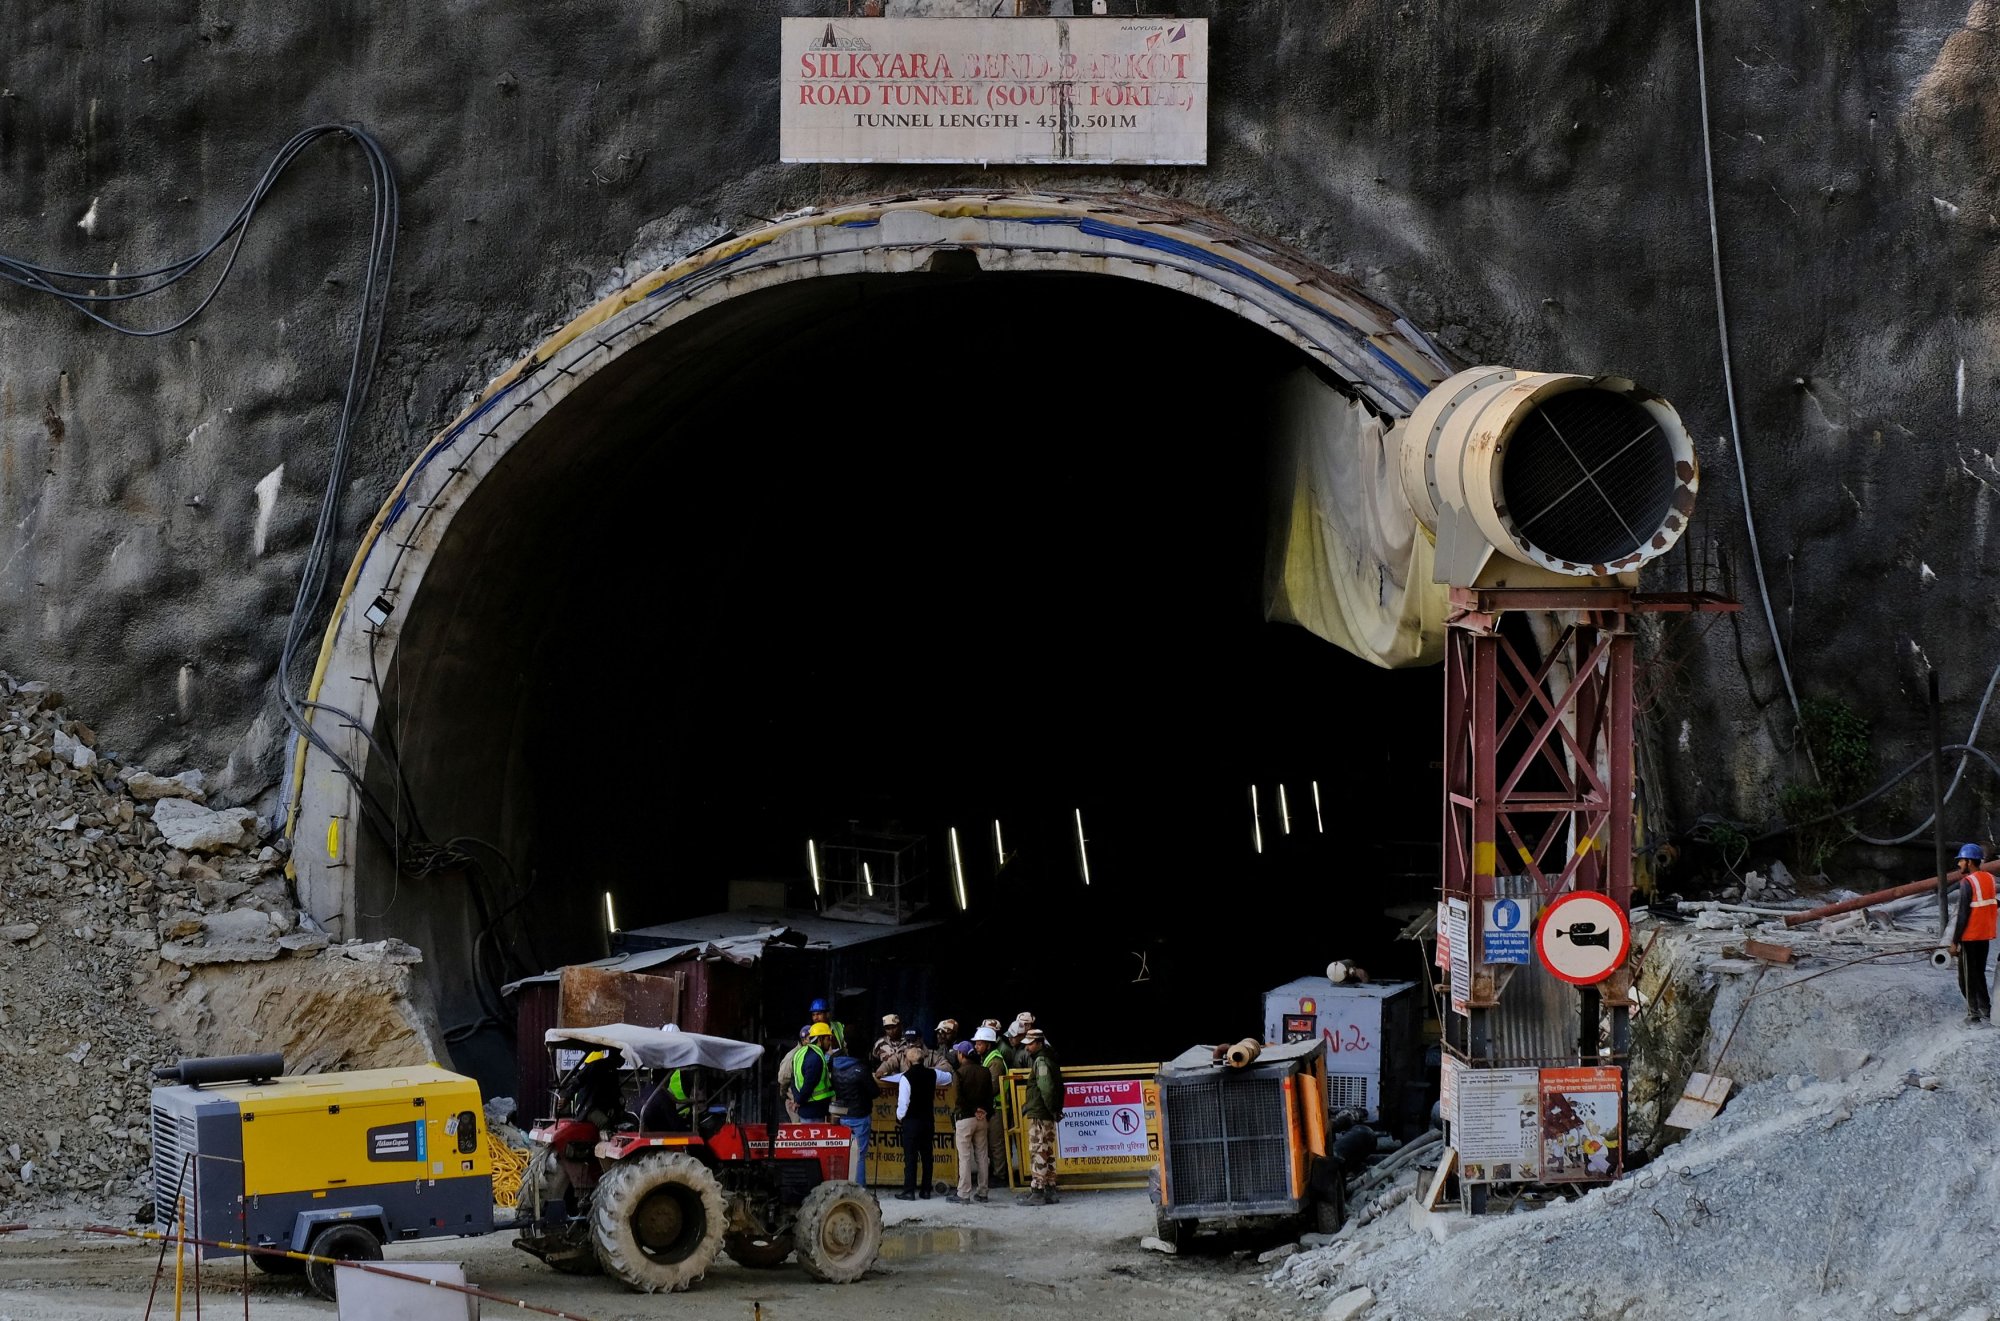 2023 11 17T162739Z 1207166267 RC2YE4A0I55Q RTRMADP 5 INDIA TUNNEL COLLAPSE 1.jpg